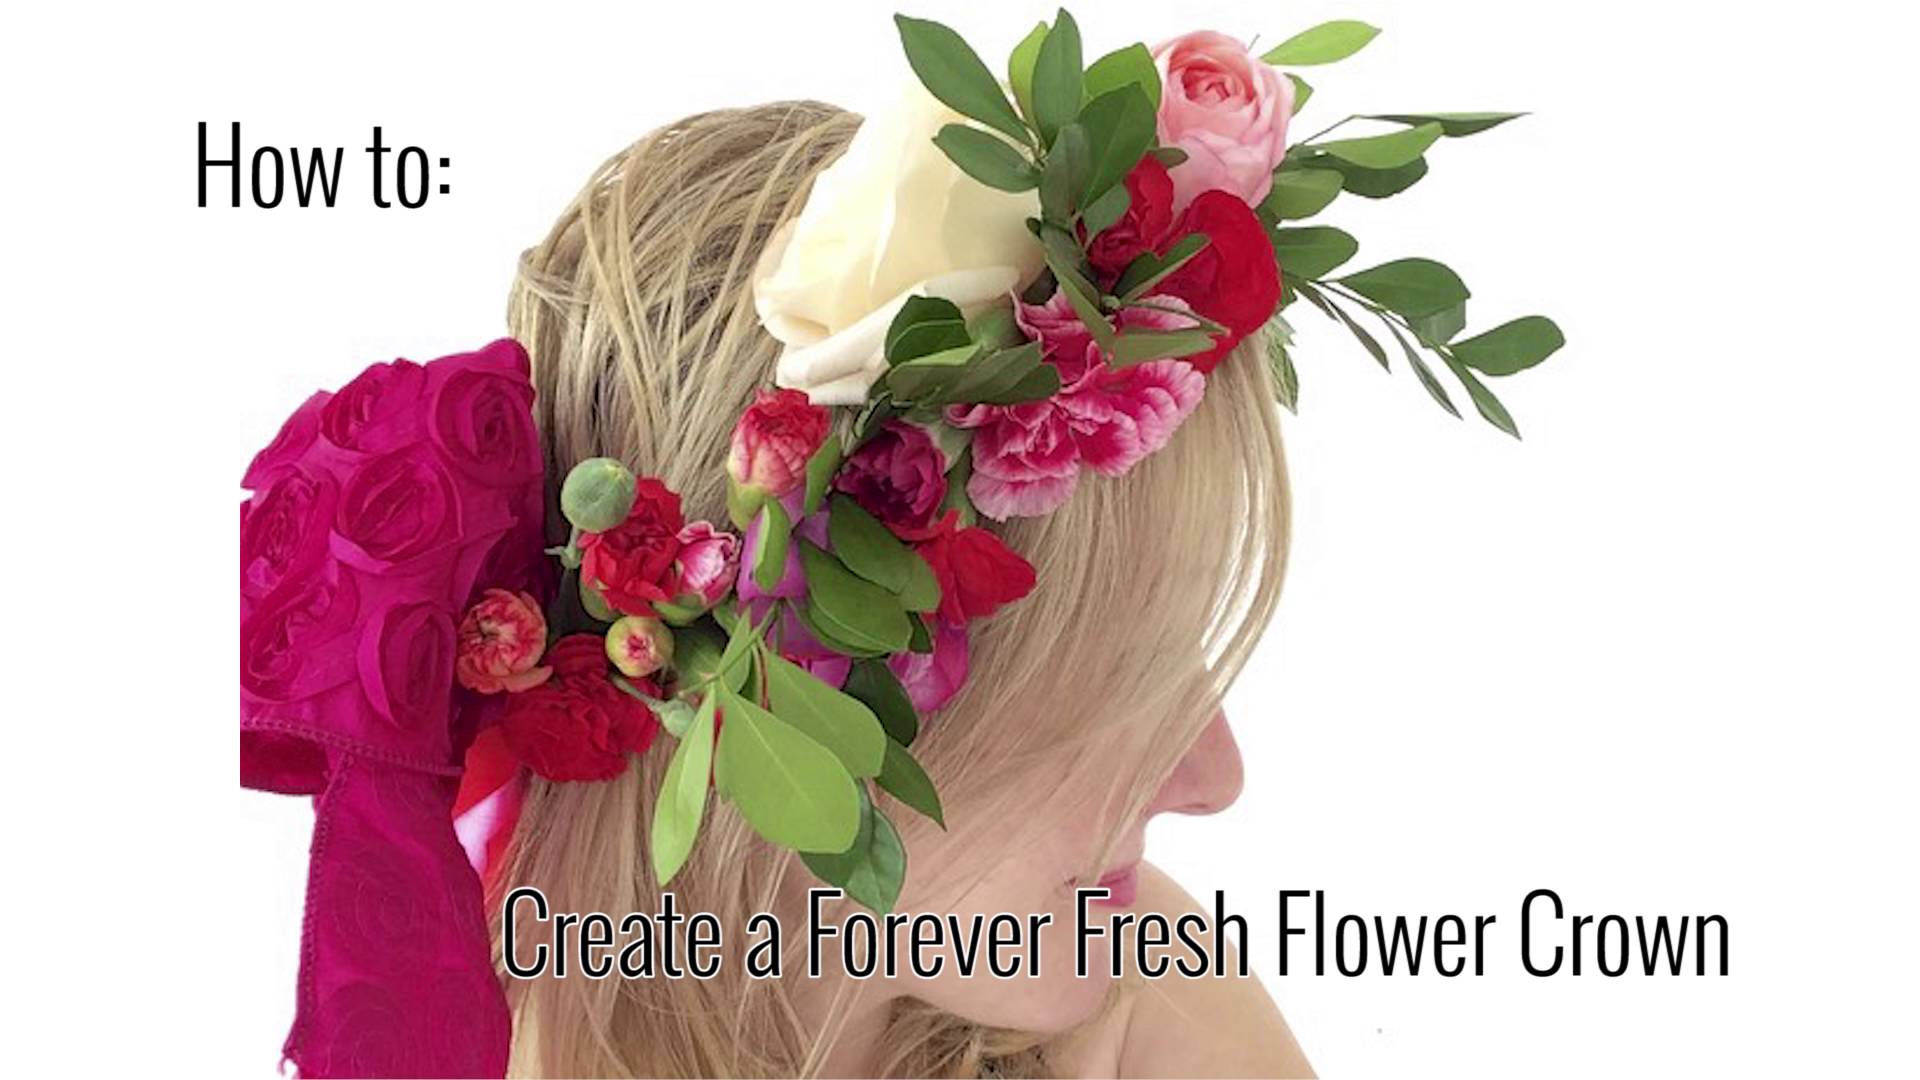 How To: Make a Forever Fresh Flower Crown - YouTube